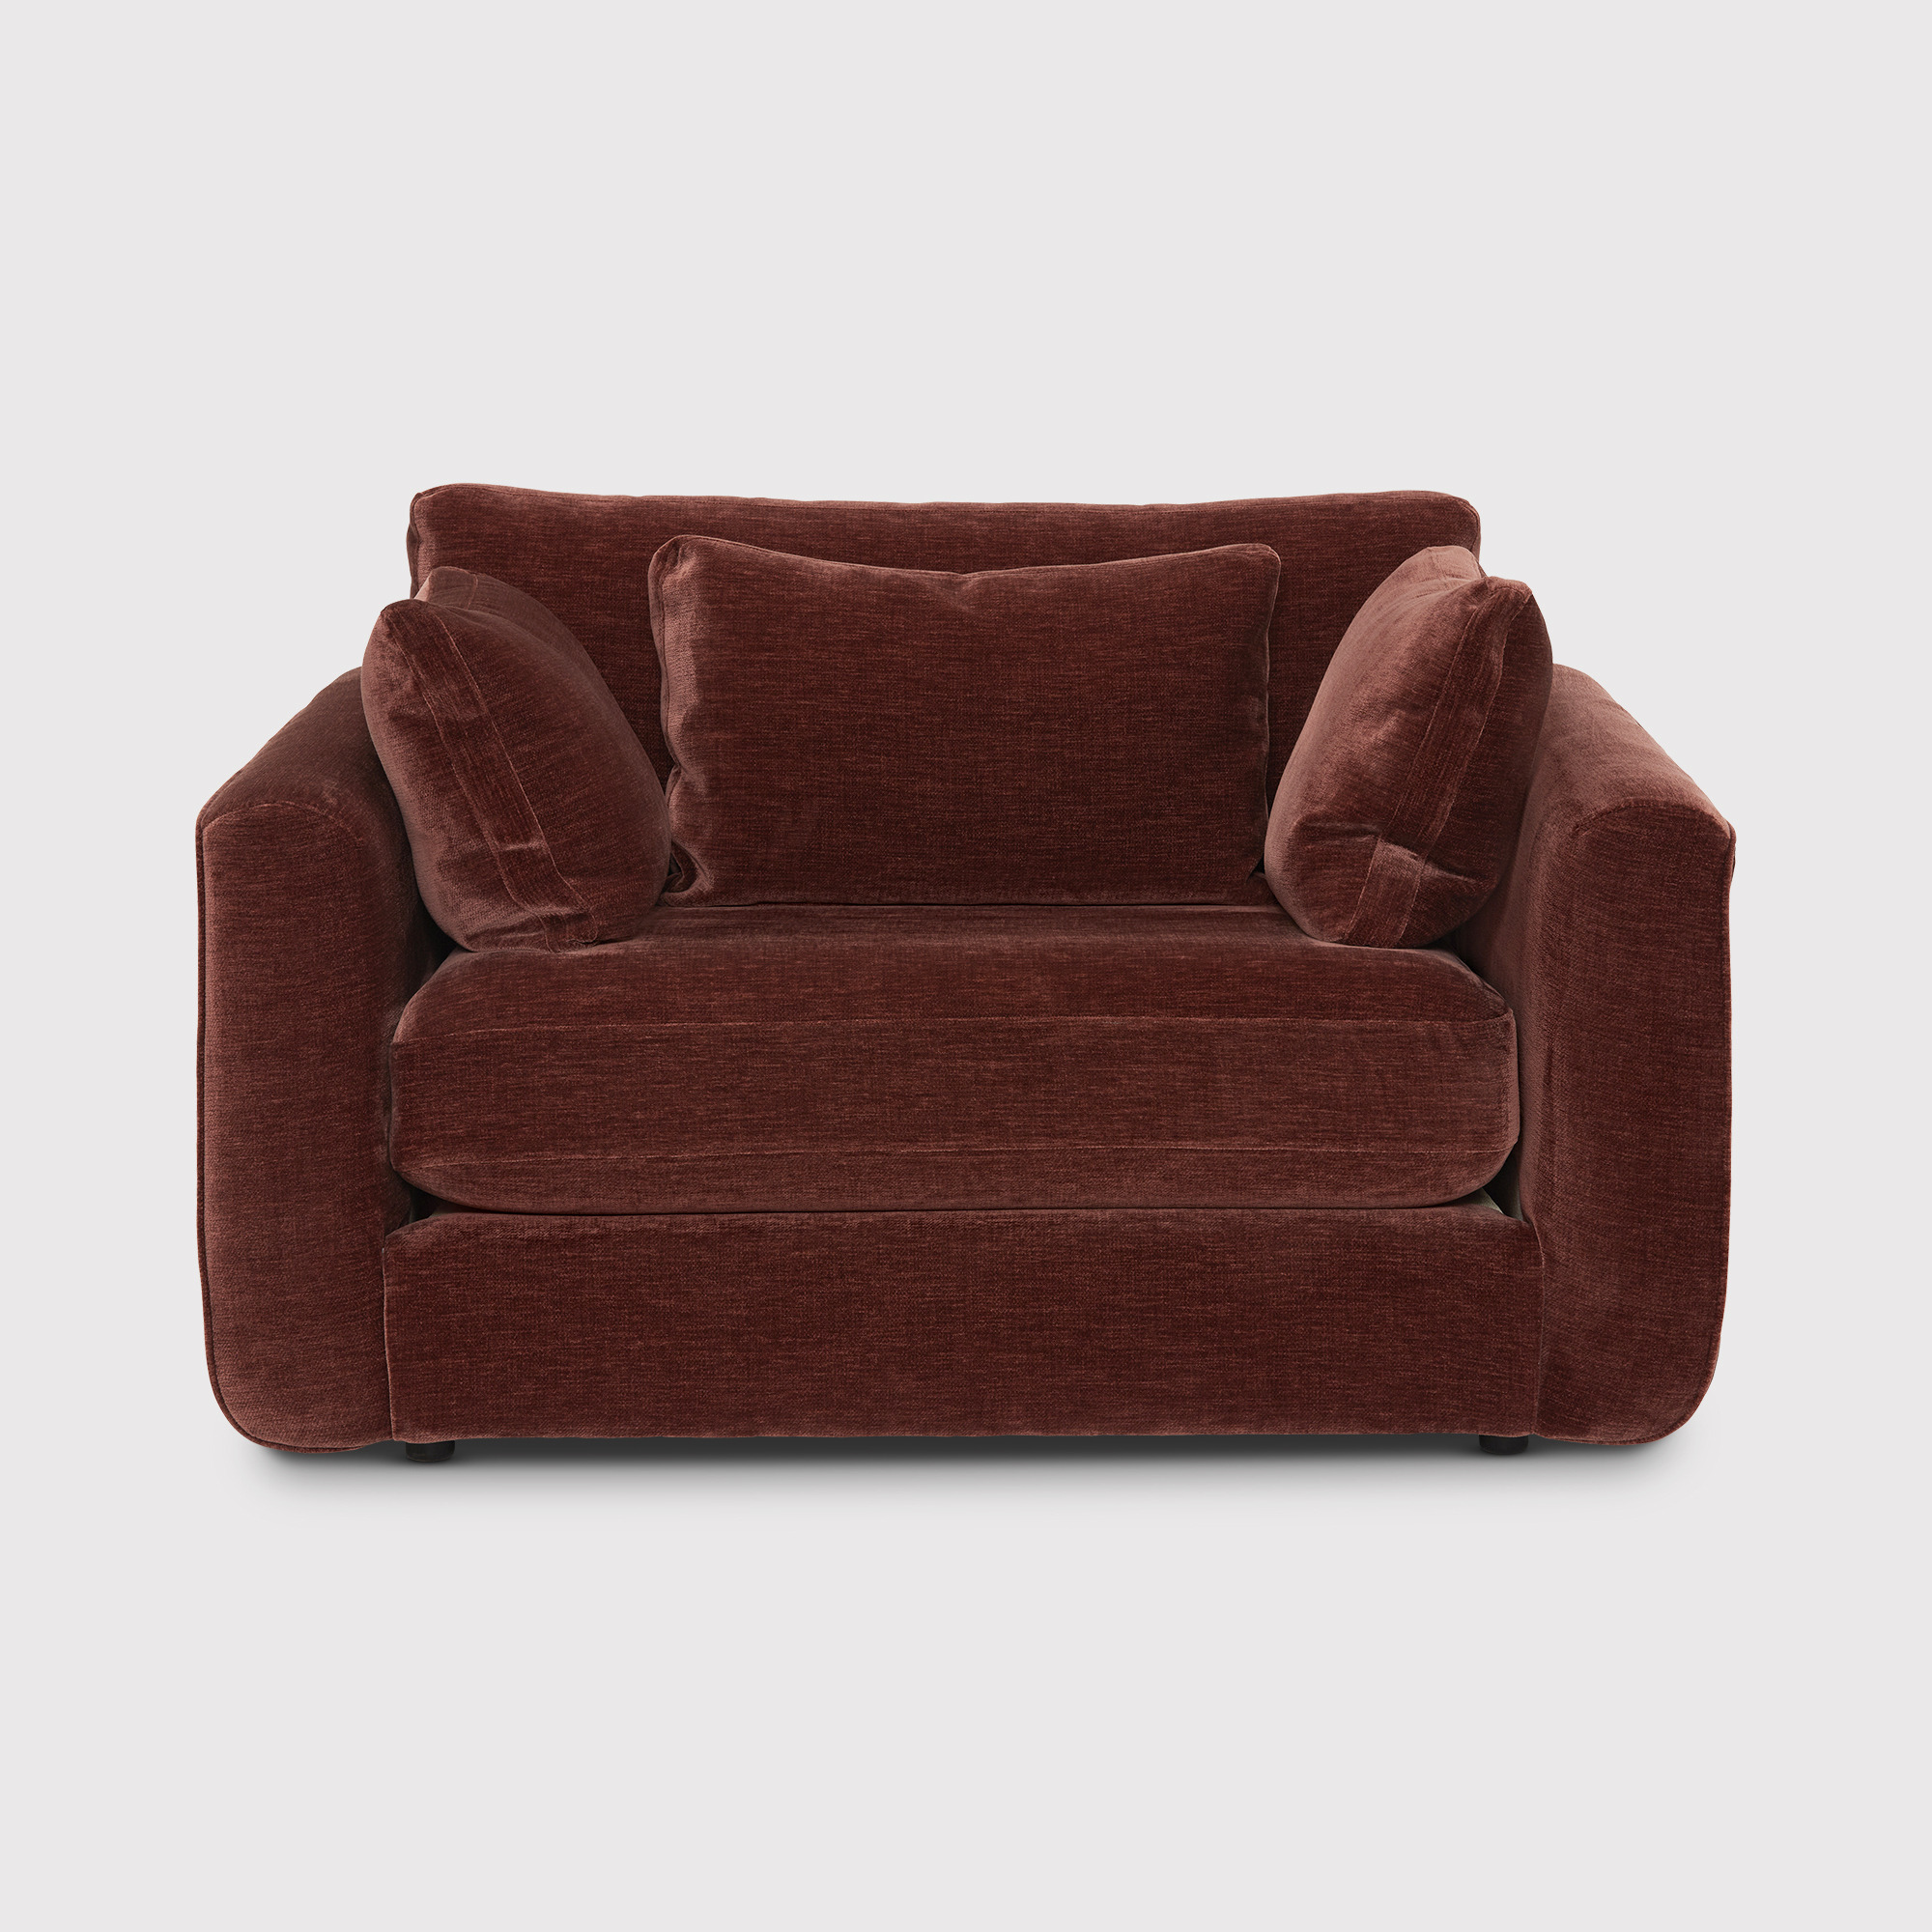 Fable Loveseat Sofa, Red Fabric - Barker & Stonehouse - image 1